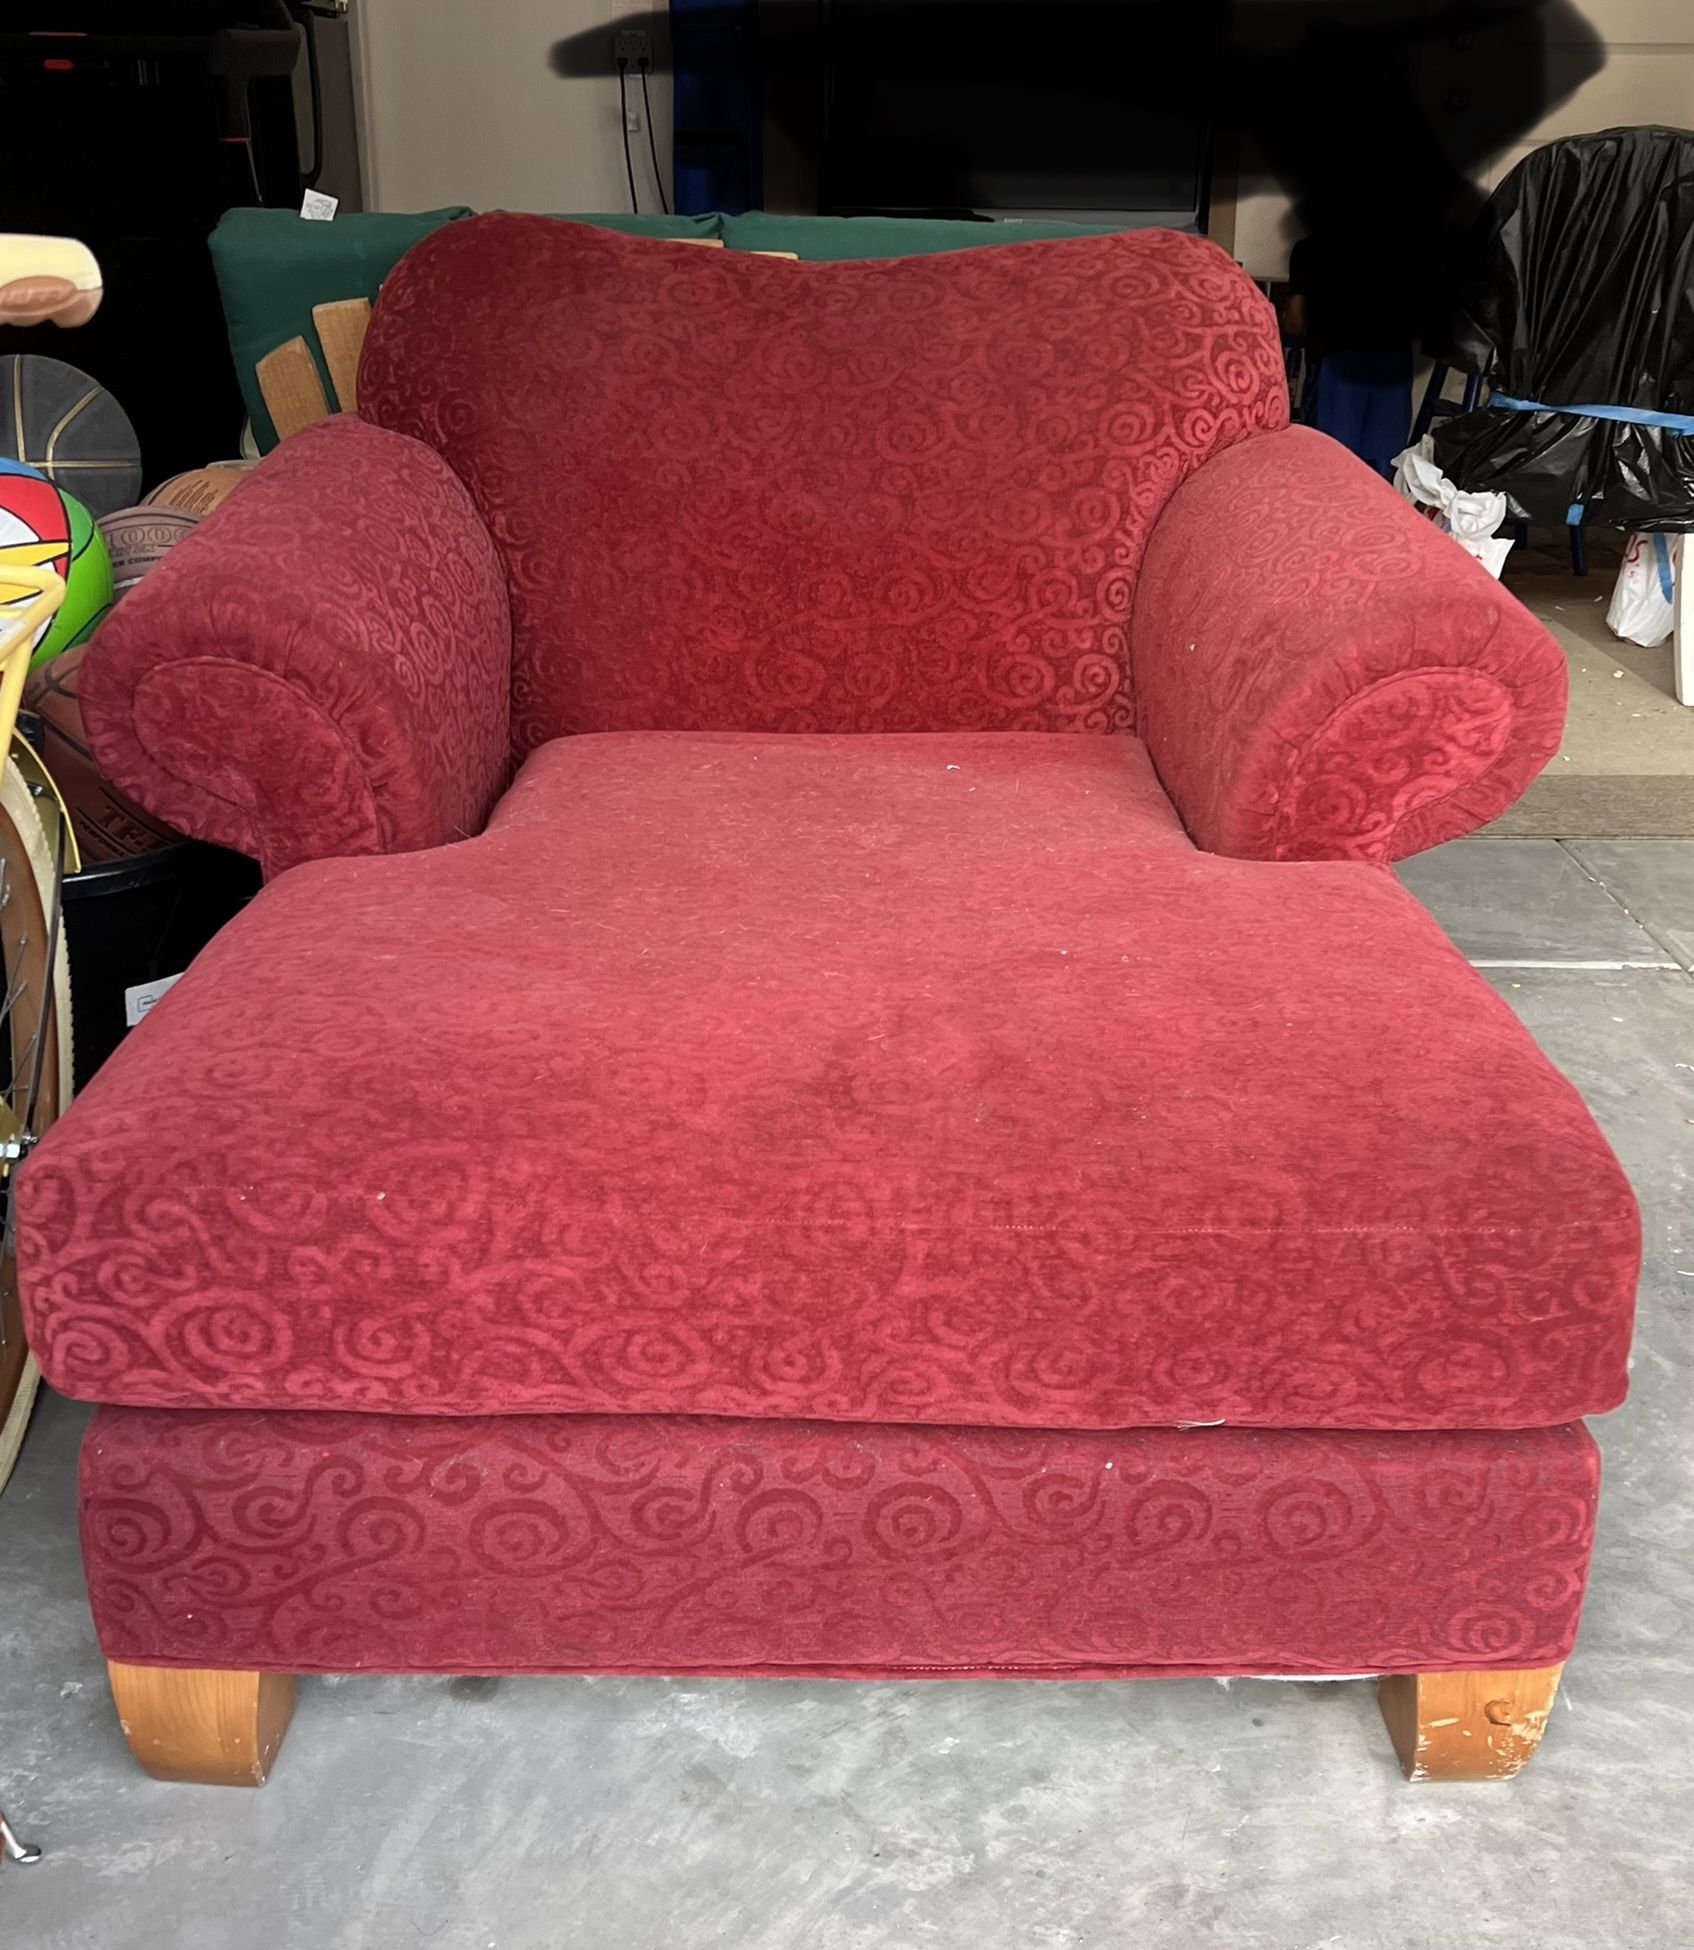 FREE Red Lounging Couch